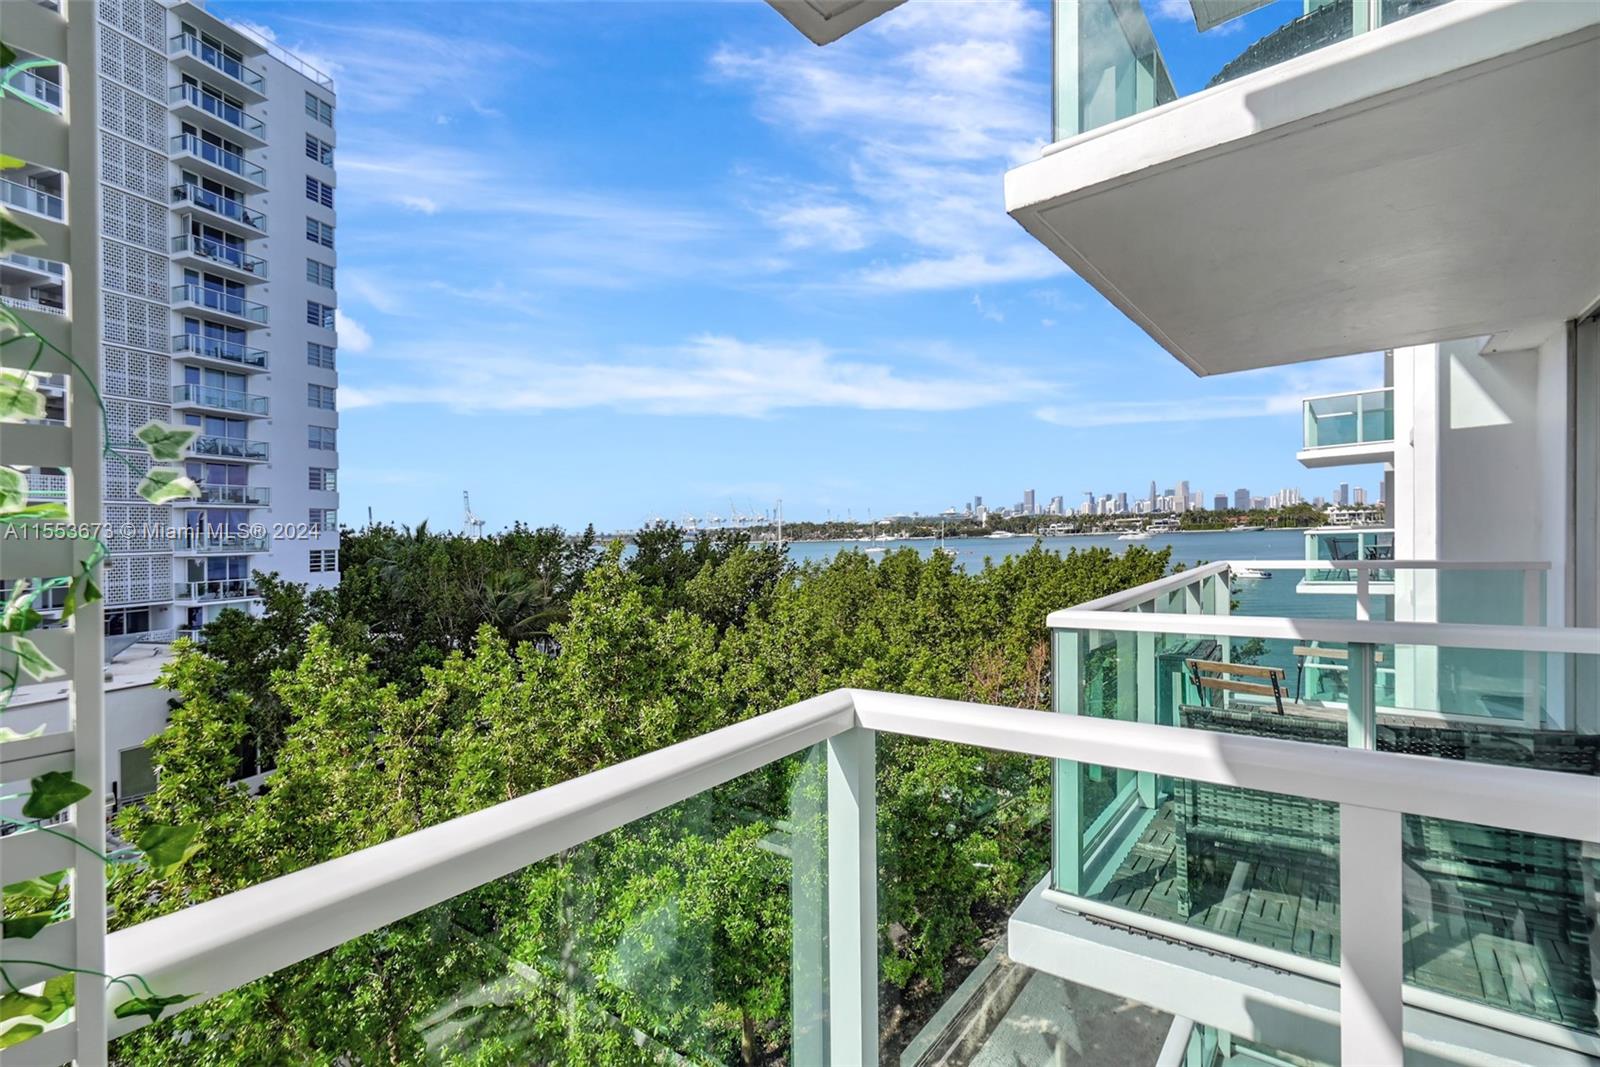 Indulge in luxury with this fully renovated bay view condo. No detail spared, featuring high-end finishes, custom cabinetry, Impact Windows & doors, and in-unit washer & dryer. Take in the breathtaking bay views from the balcony. The full-service building offers a renovated bayfront pool, 3,000 sq ft gym, 24/7 security, convenience store, and more. Centrally located in Miami Beach, with Whole Foods, restaurants, and stores nearby.